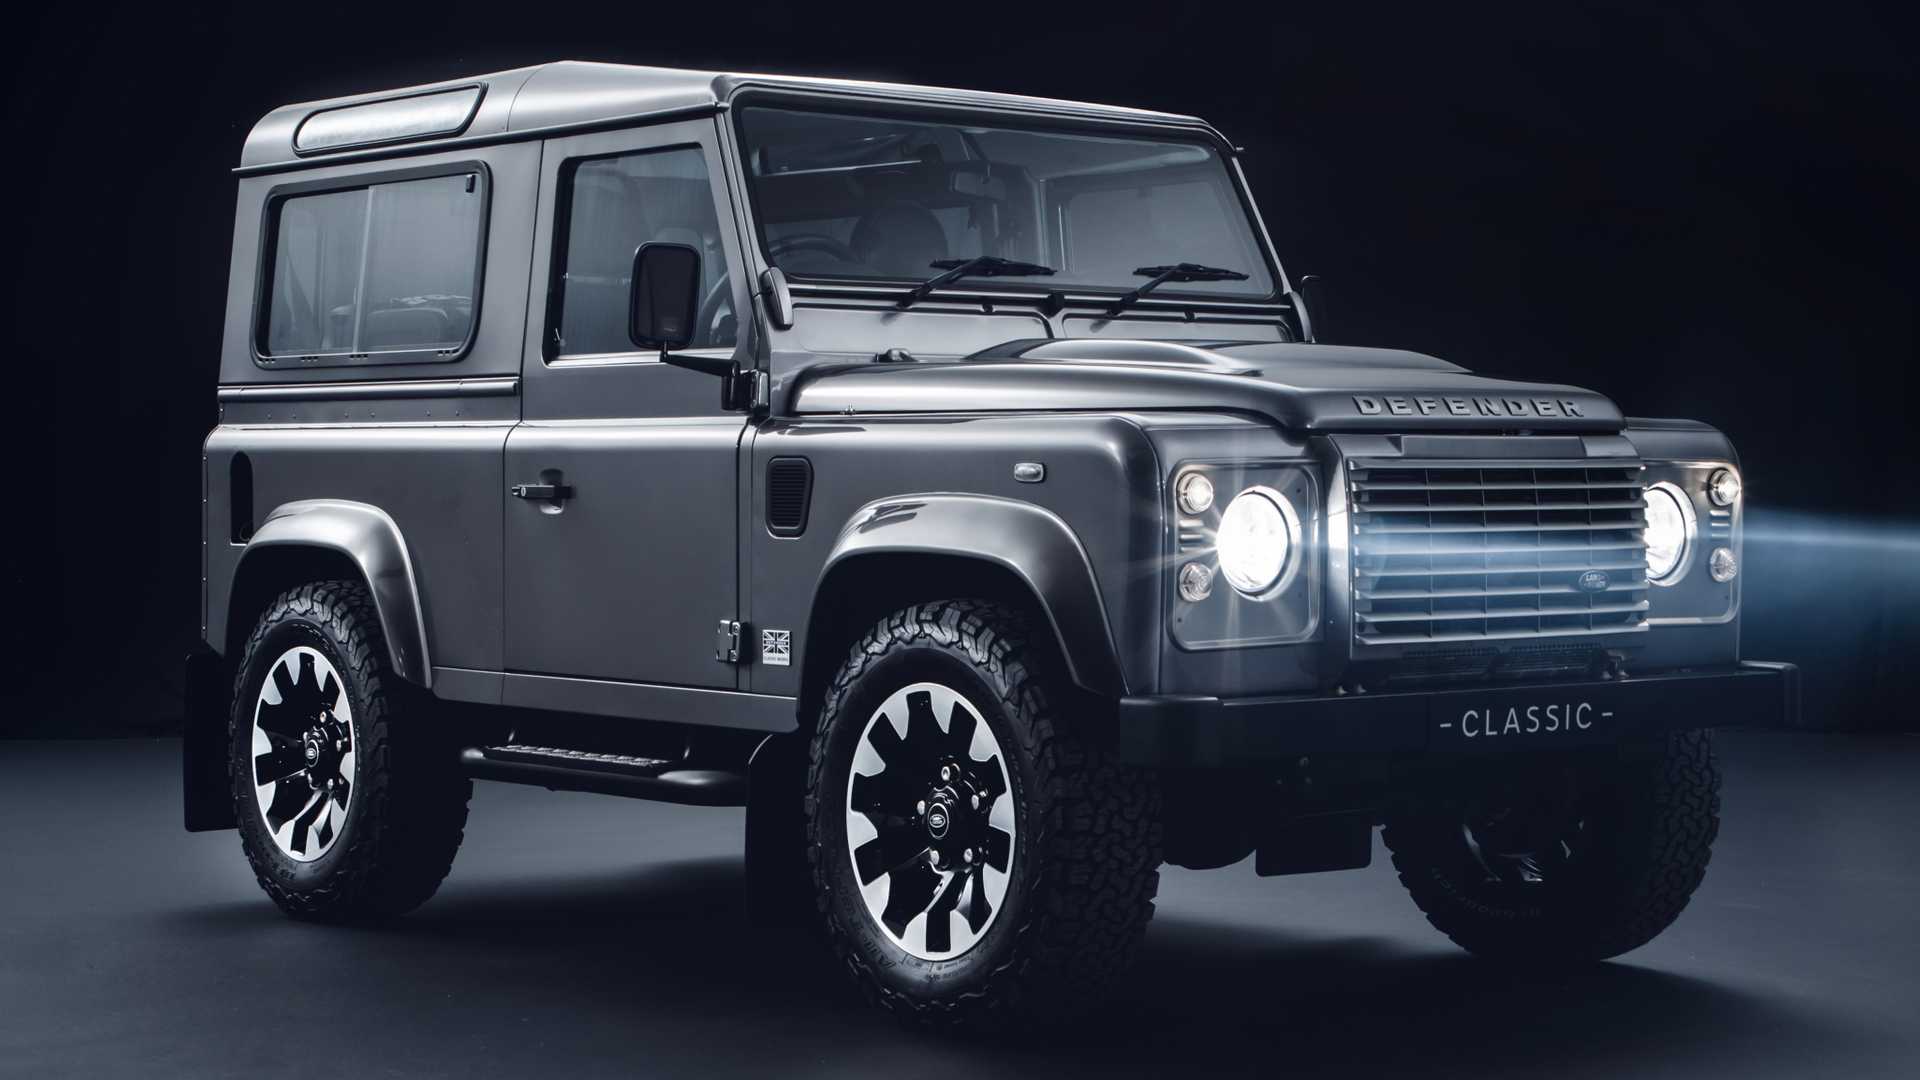 land-rover-classic-upgrades-old-defender-1994-2016-4